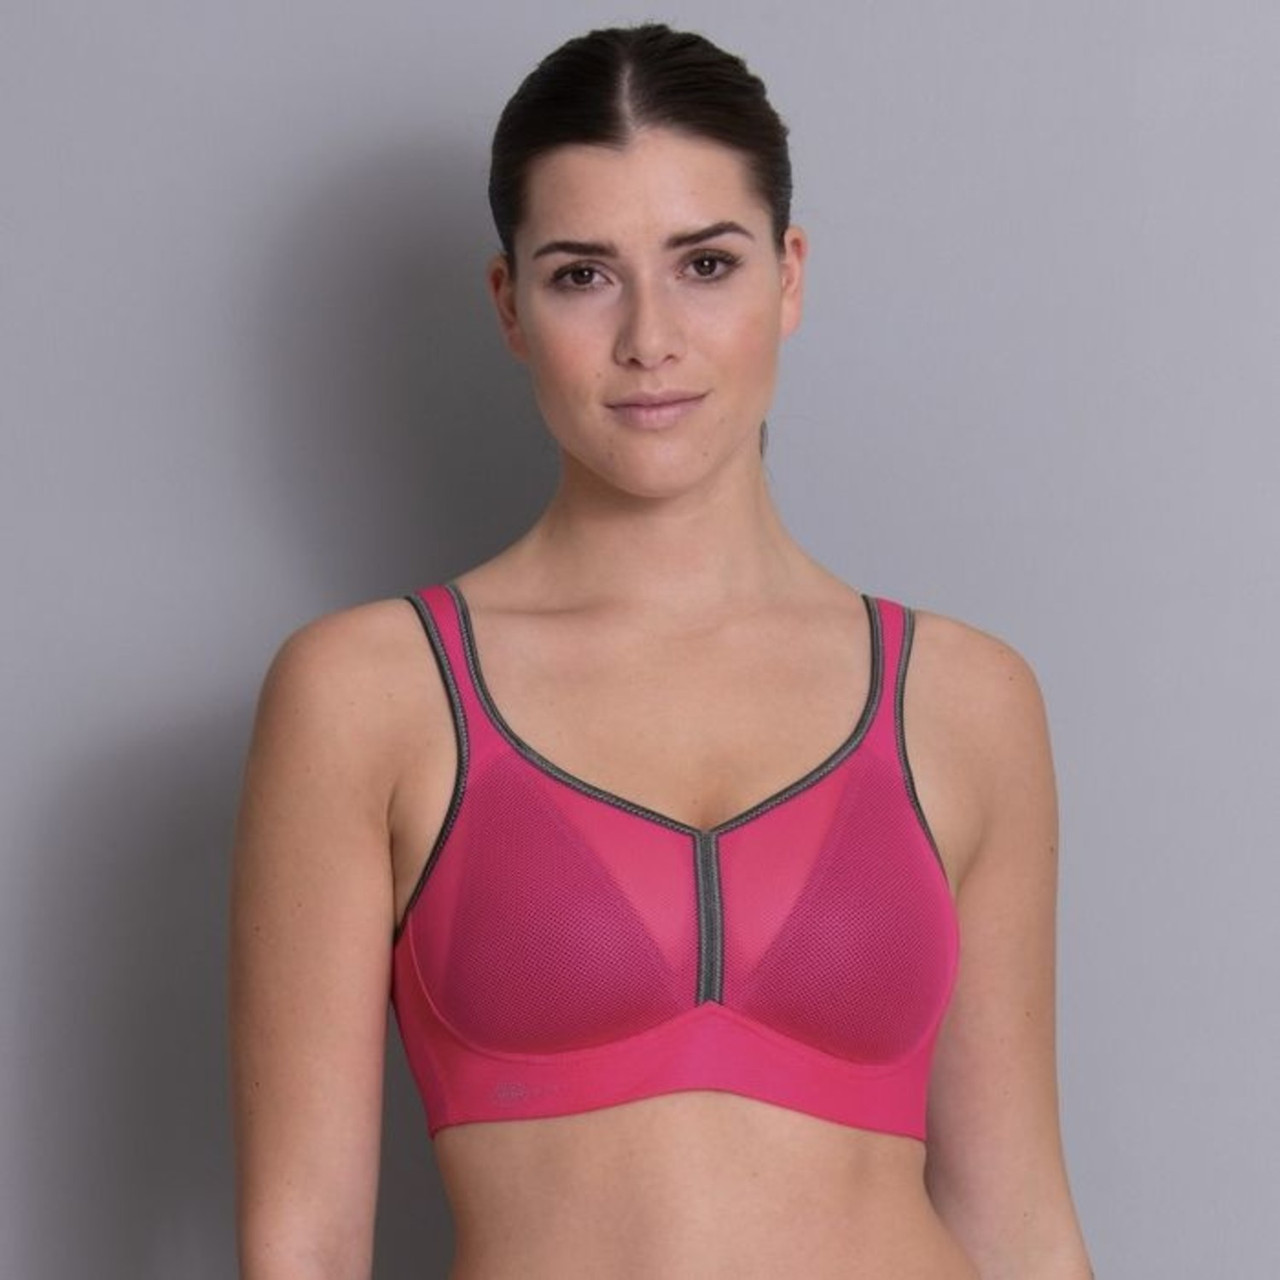 Anita Air Control Delta Pad Sports Bra in Pink/Anthracite - Busted Bra Shop